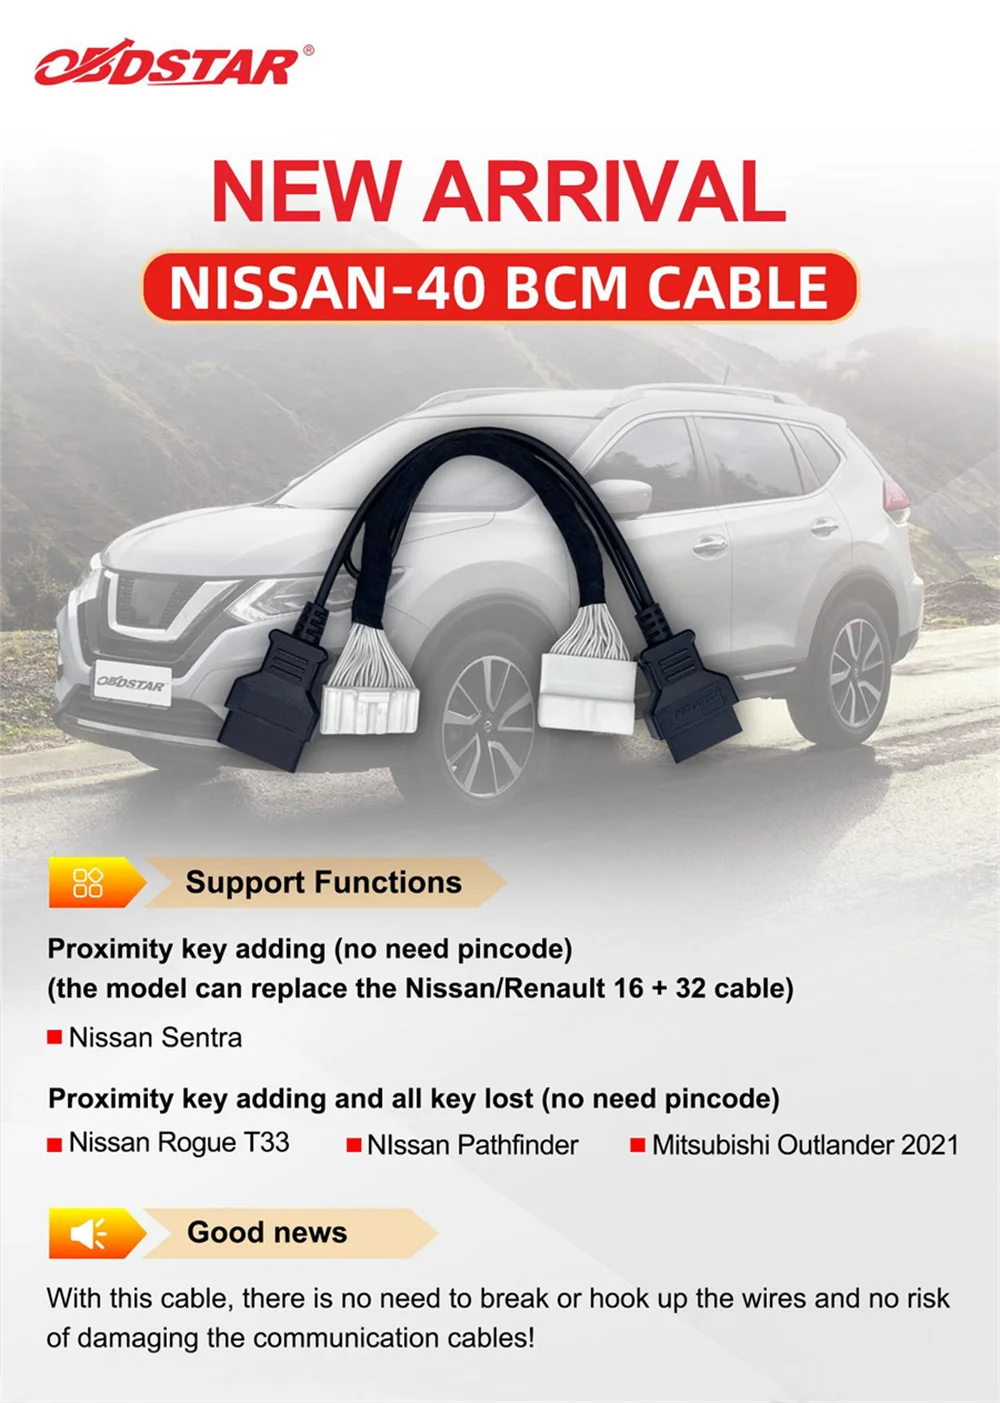 

OBDSTAR for NISSAN -40 BCM Cable Used for X300 DP PLUS/ X300 PRO4/ X300 DP Key Master